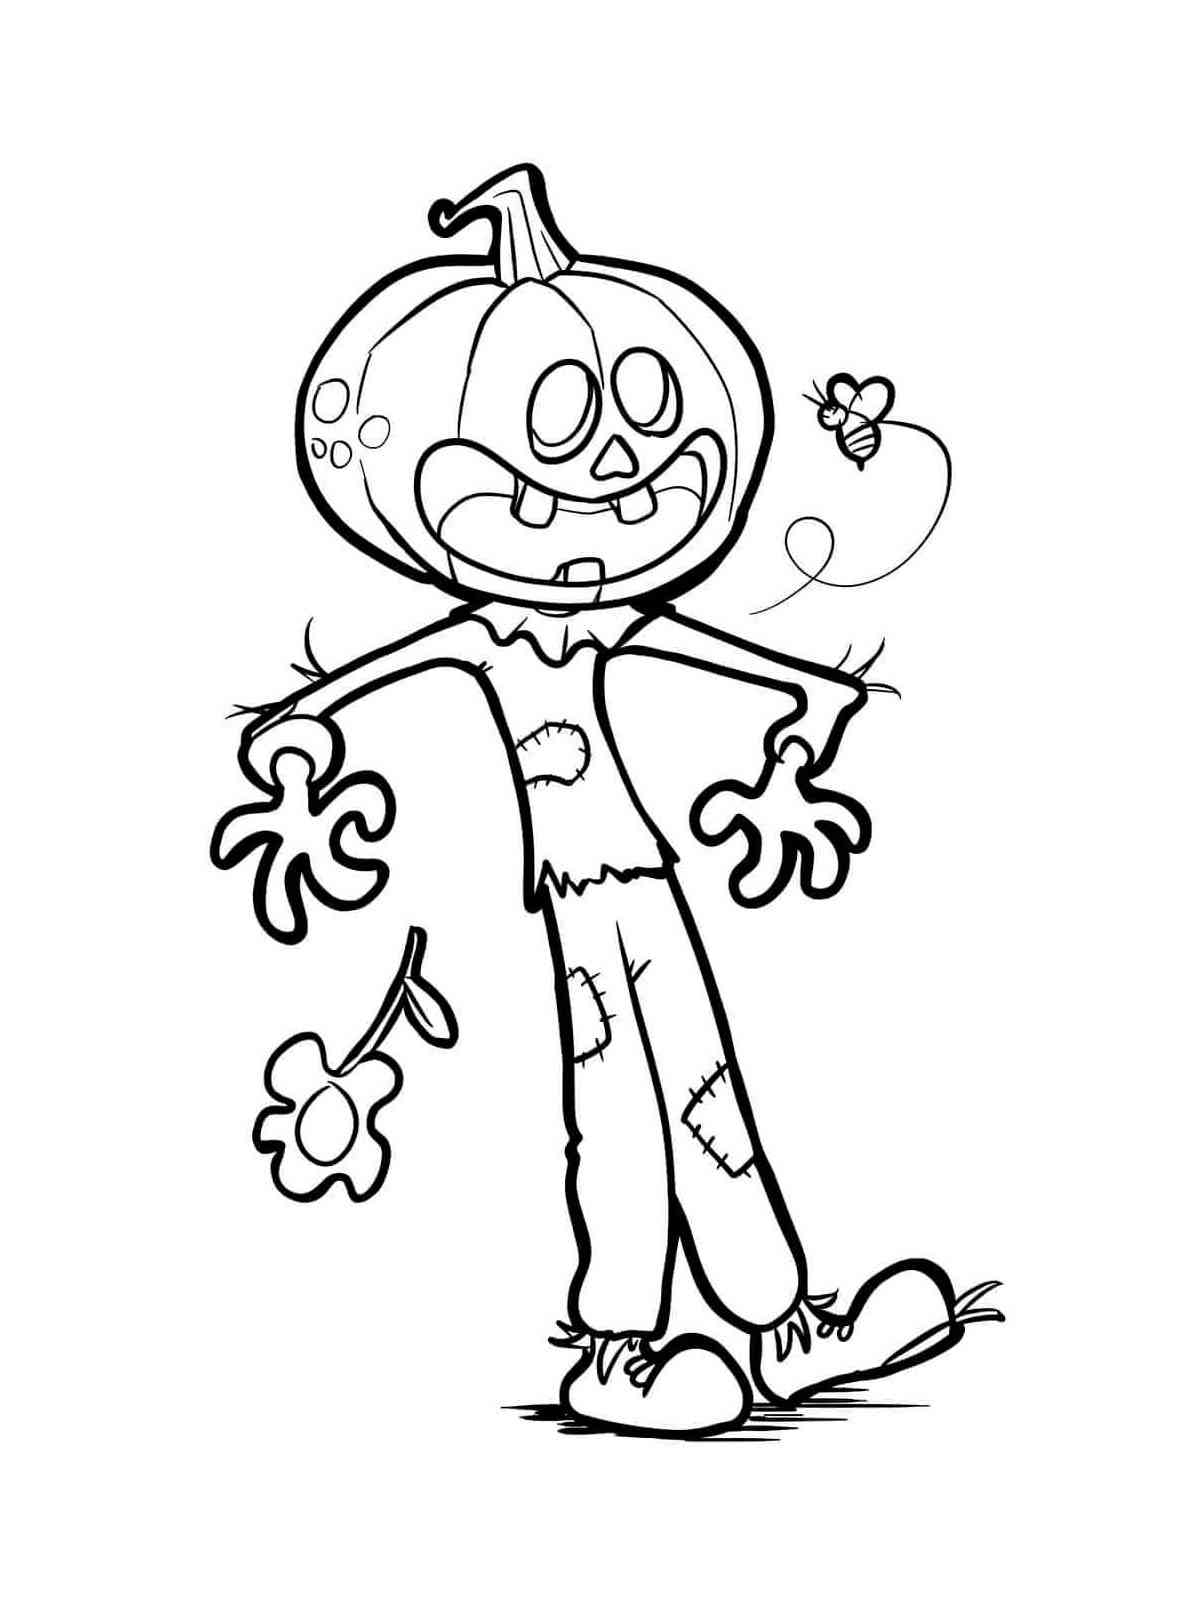 Pumpkin Head coloring pages